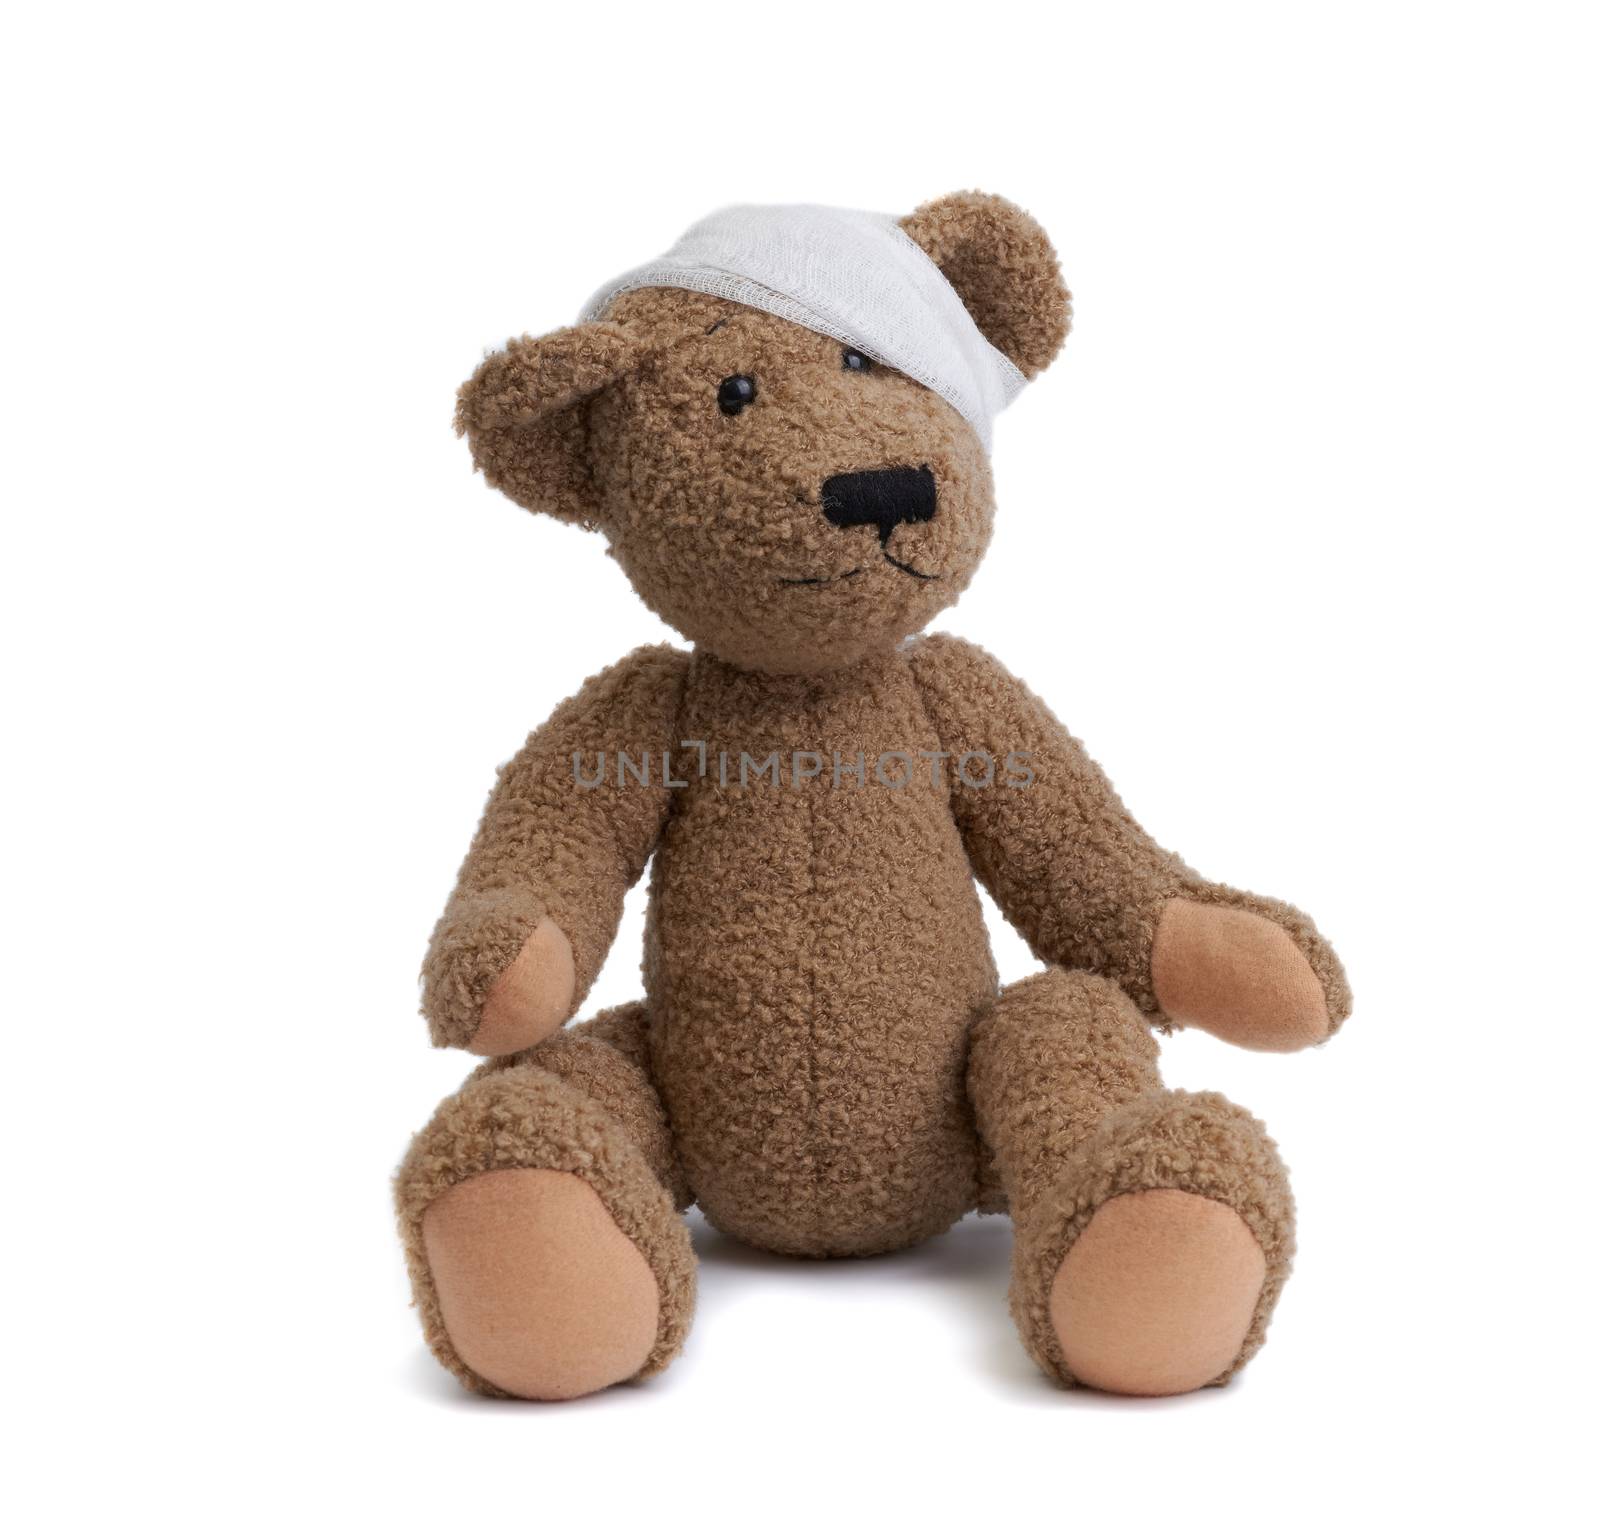 brown teddy bear with a bandaged head in a white medical bandage on a white background, concept of child trauma, headache